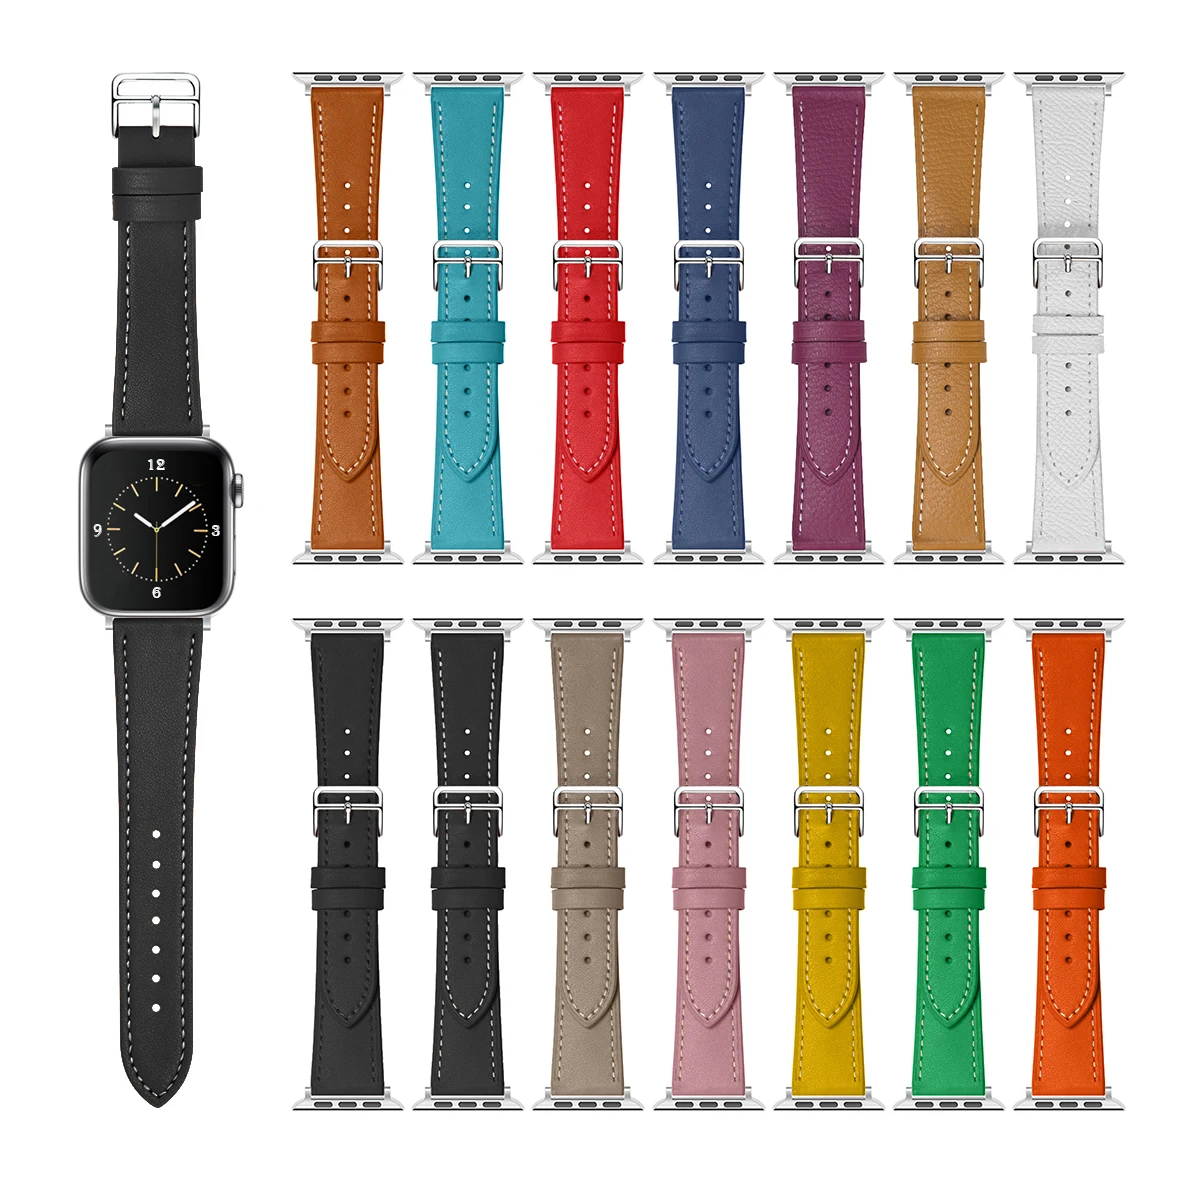 

42mm 44mm Single Tour Leather Watch Band Strap For iWatch, Genuine Leather Band Adapter For Apple Watch SE 6 5 4 3 2 1, 14 colors